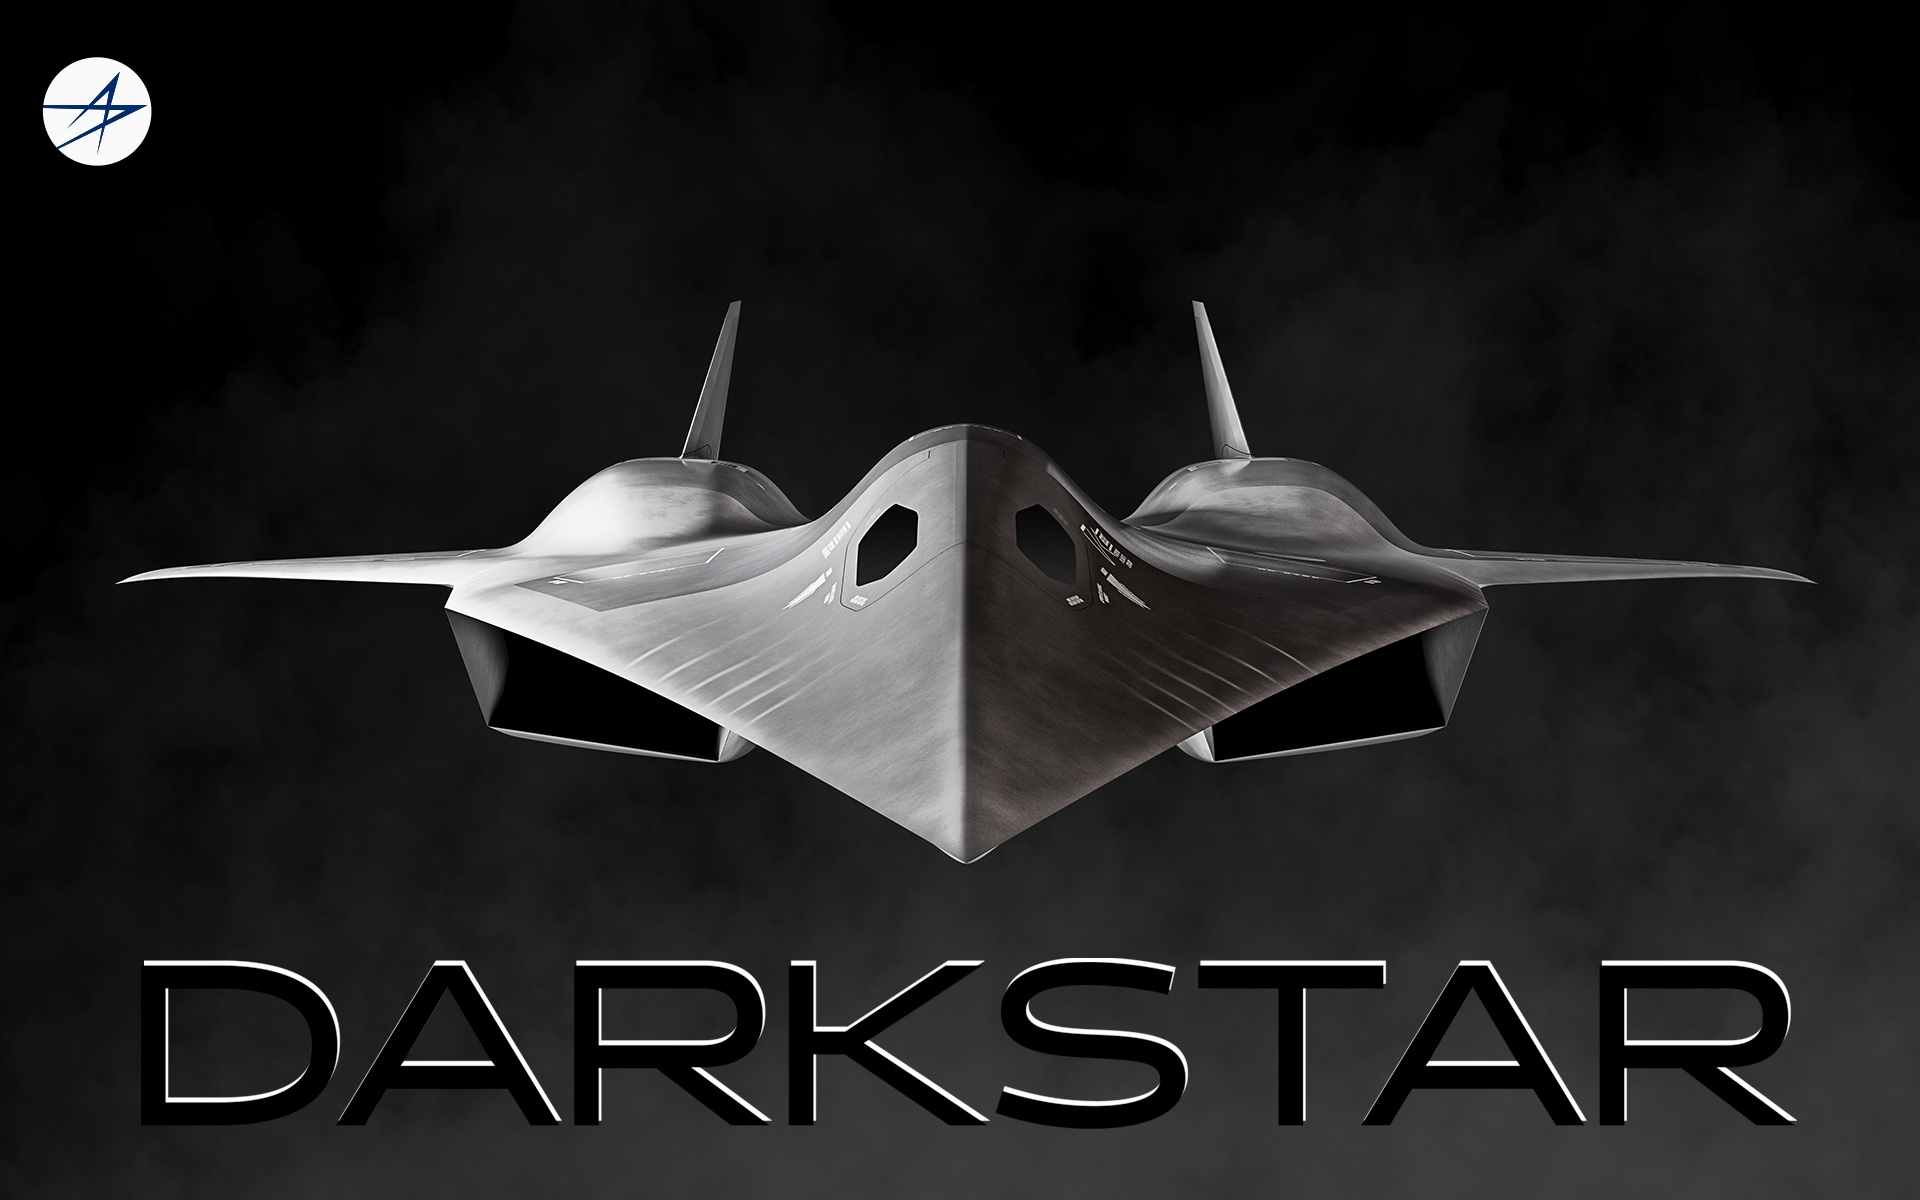 Fighterman_FFRC Martin which designed the Darkstar for #TopGunMaverick put up a page dedicated to the fictional experimental hypersonic jet, and provided us with some neat wallpaper